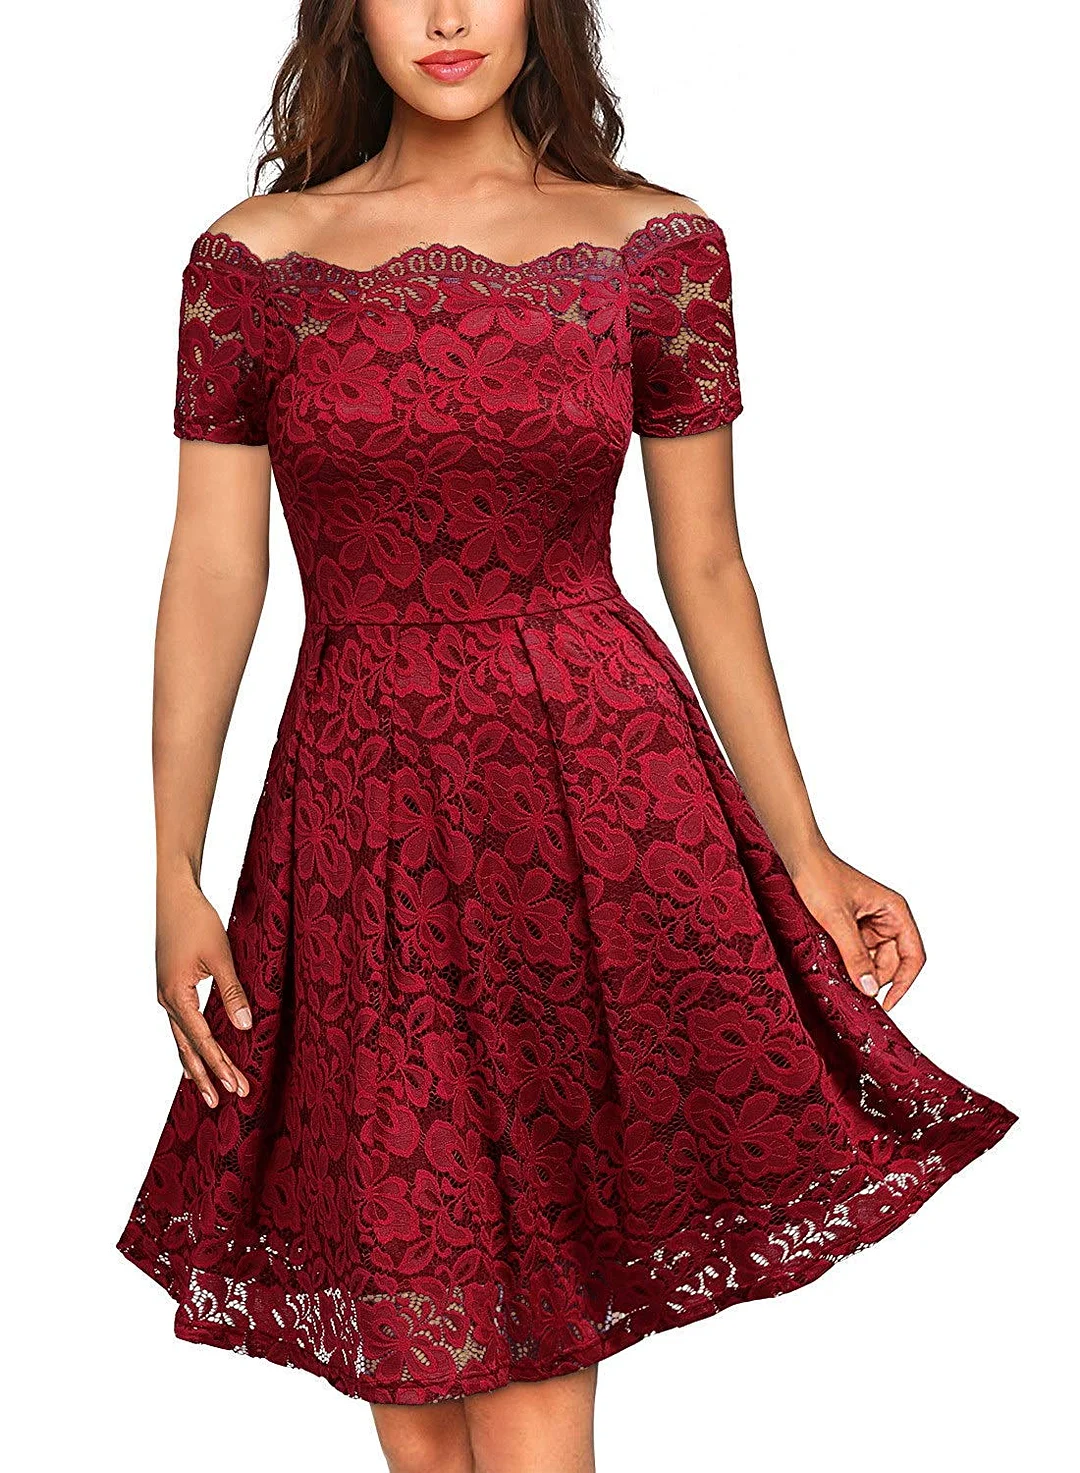 Party Swing Dress Women's Vintage Floral Lace Short Sleeve Boat Neck Cocktail Party Swing Dress